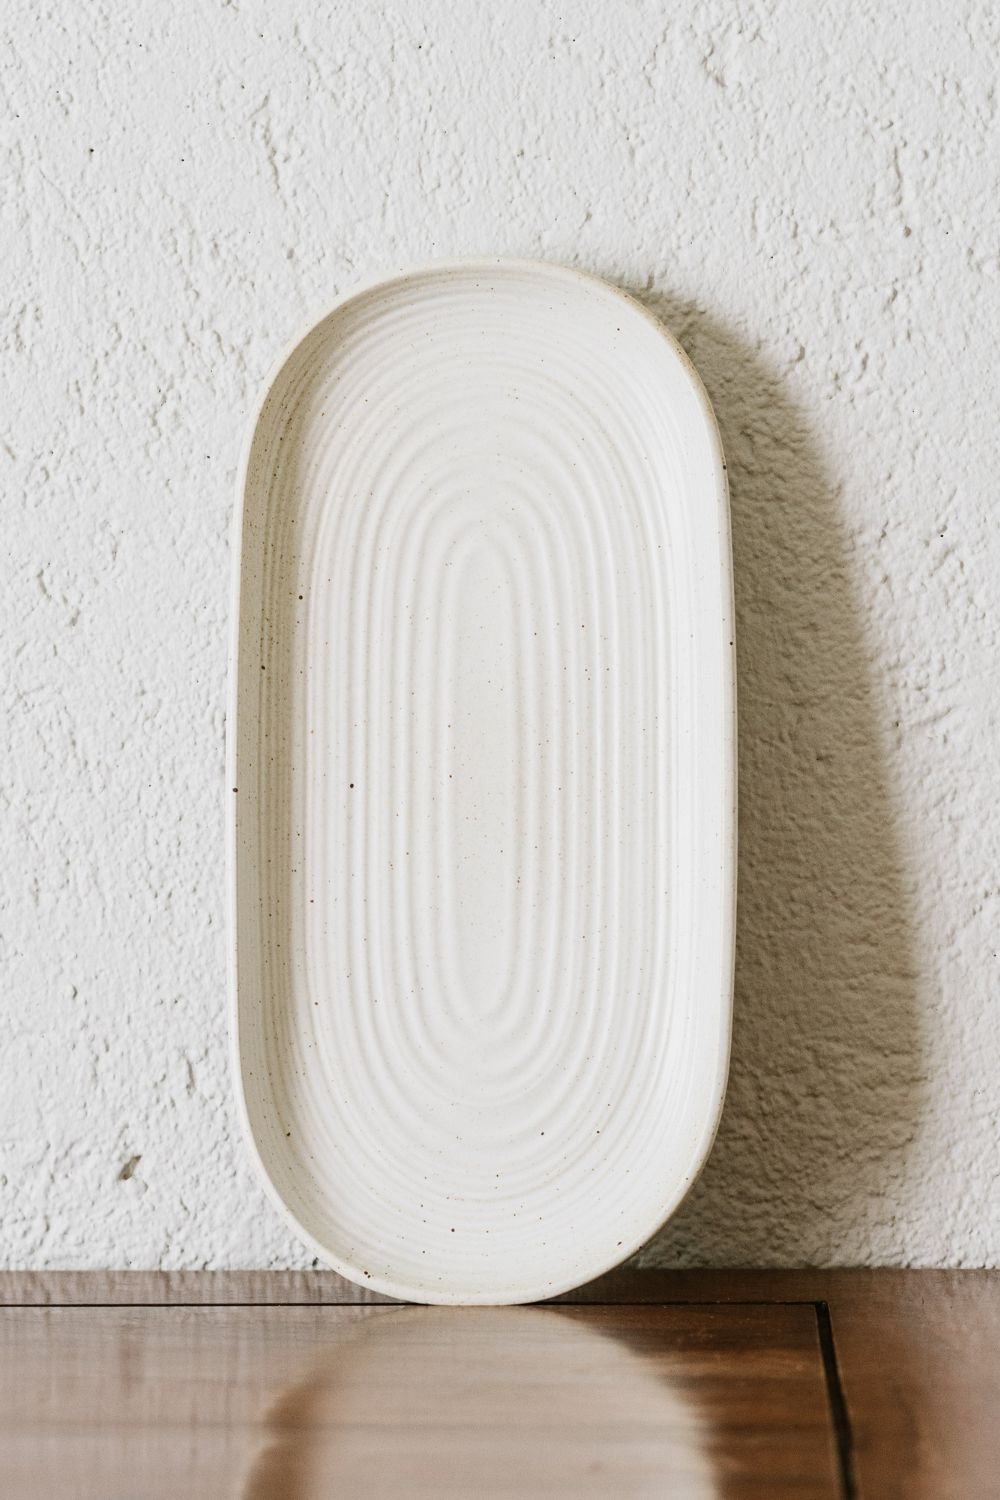 Speckled White Oval Serving Plate (14")